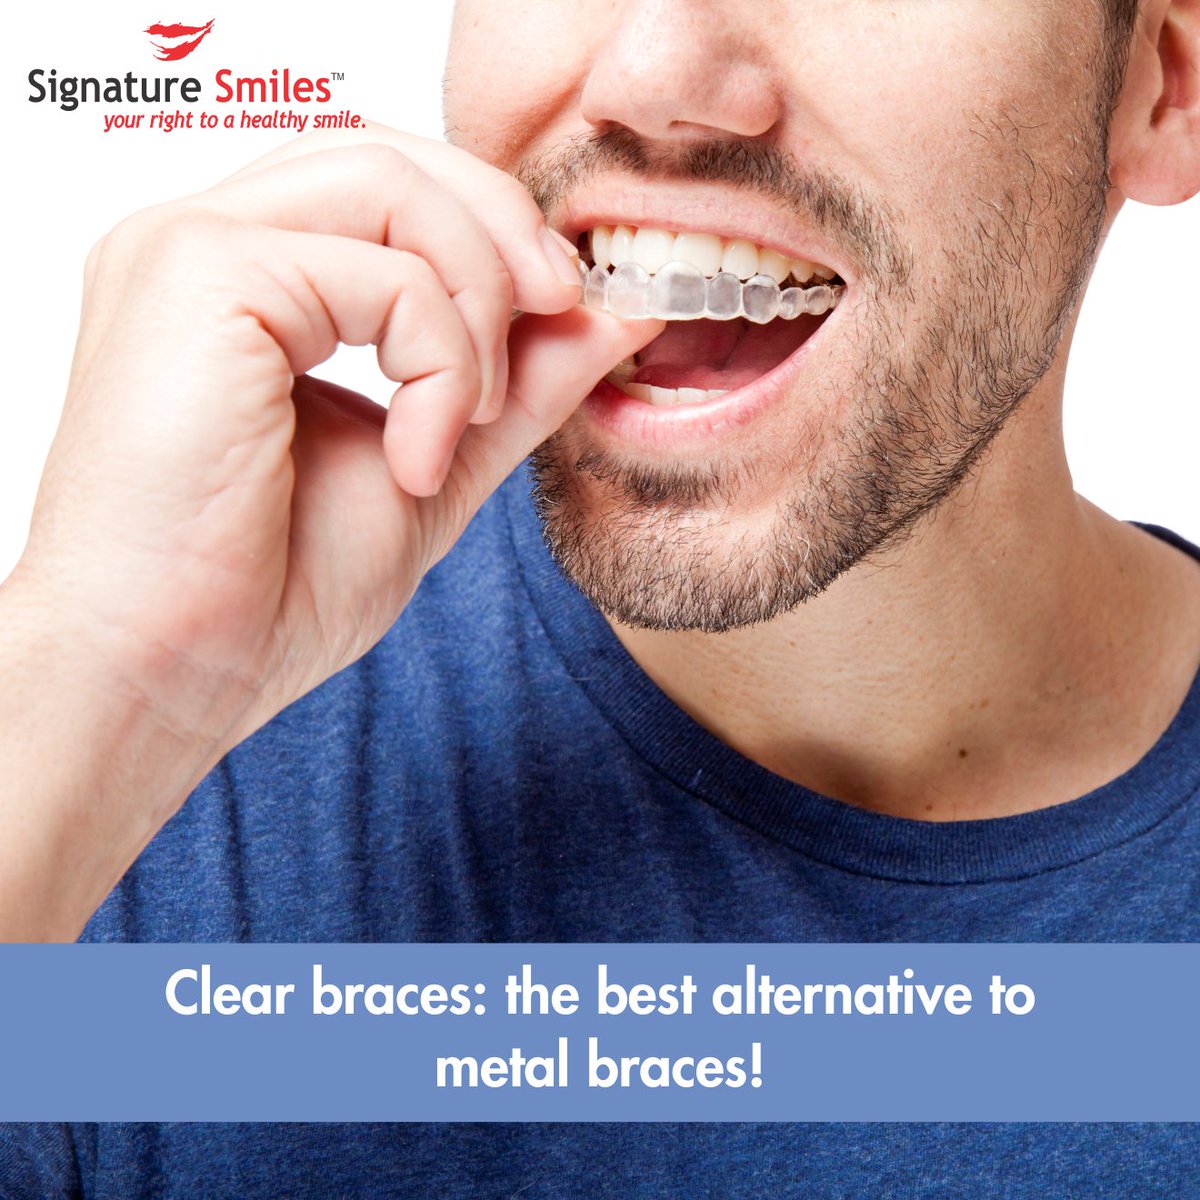 Clear braces are light weight, removable and comfortable. They transform your smile without interfering with your day-to-day life.

#clearbraces #metalbraces #comfortable #dentalhygiene #wednesdaywisdom #cavities #pain #mouth #gumdisease #dentist #smile #signaturesmilesmumbai